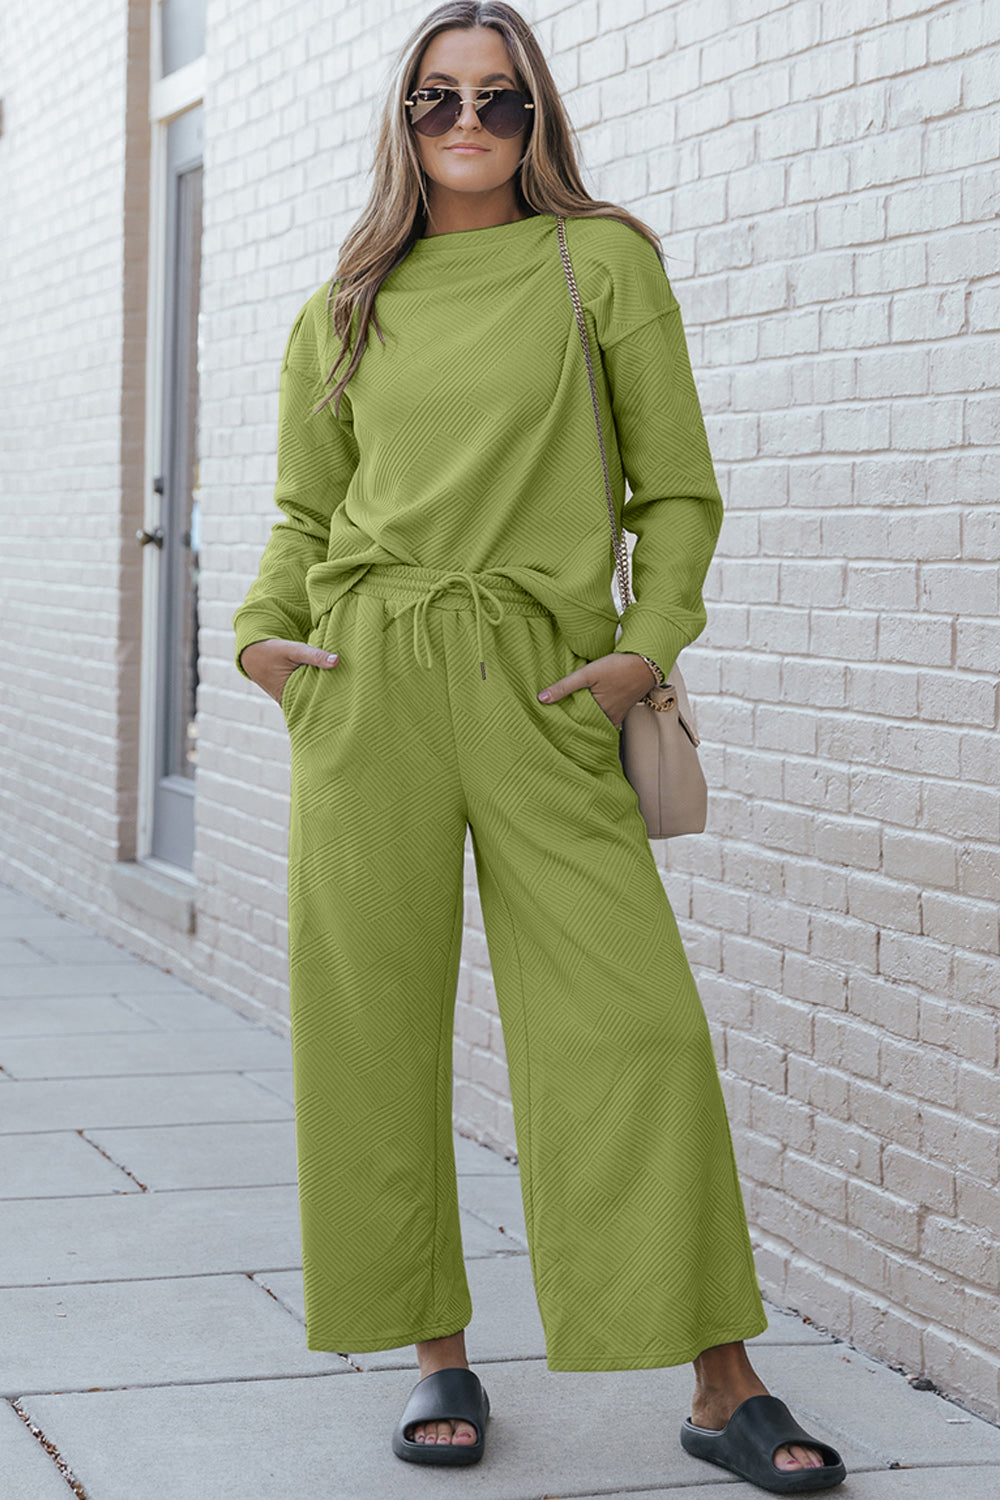 Textured Long Sleeve Top and Drawstring Pants Set - Beauty by Lady Finch